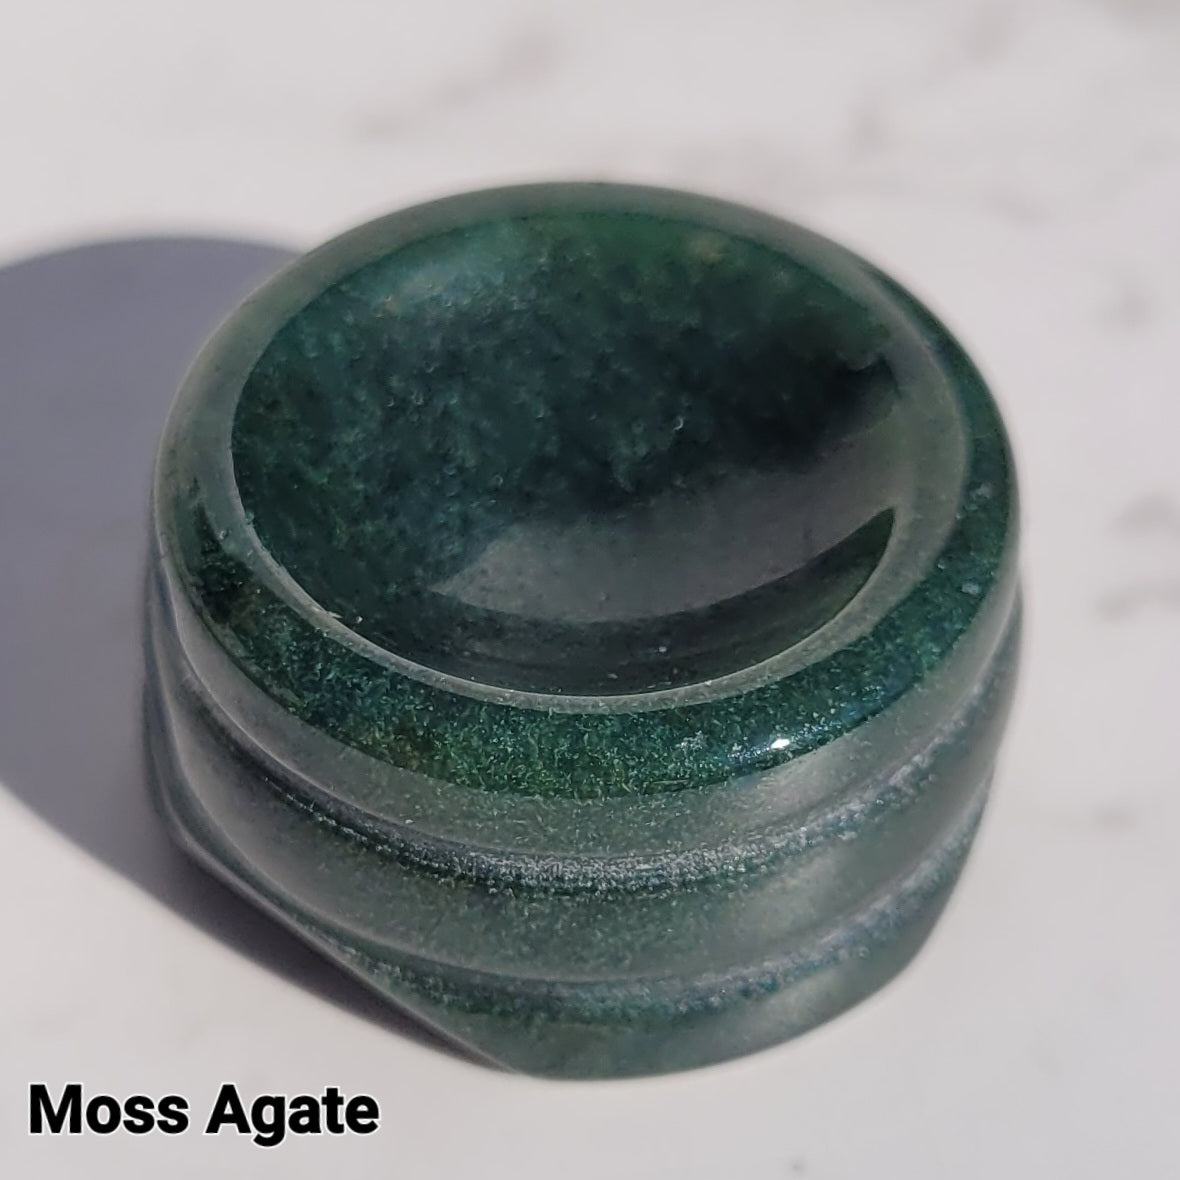 100% Crystal Sphere Stands in Many Materials in Clear Quartz, Howlite, Opalite, Moss Agate, Blue Sandstone, Red Jasper or Tigers Eye, for Crystal Balls or Eggs 1" to 2.5" (25mm to 64mm)